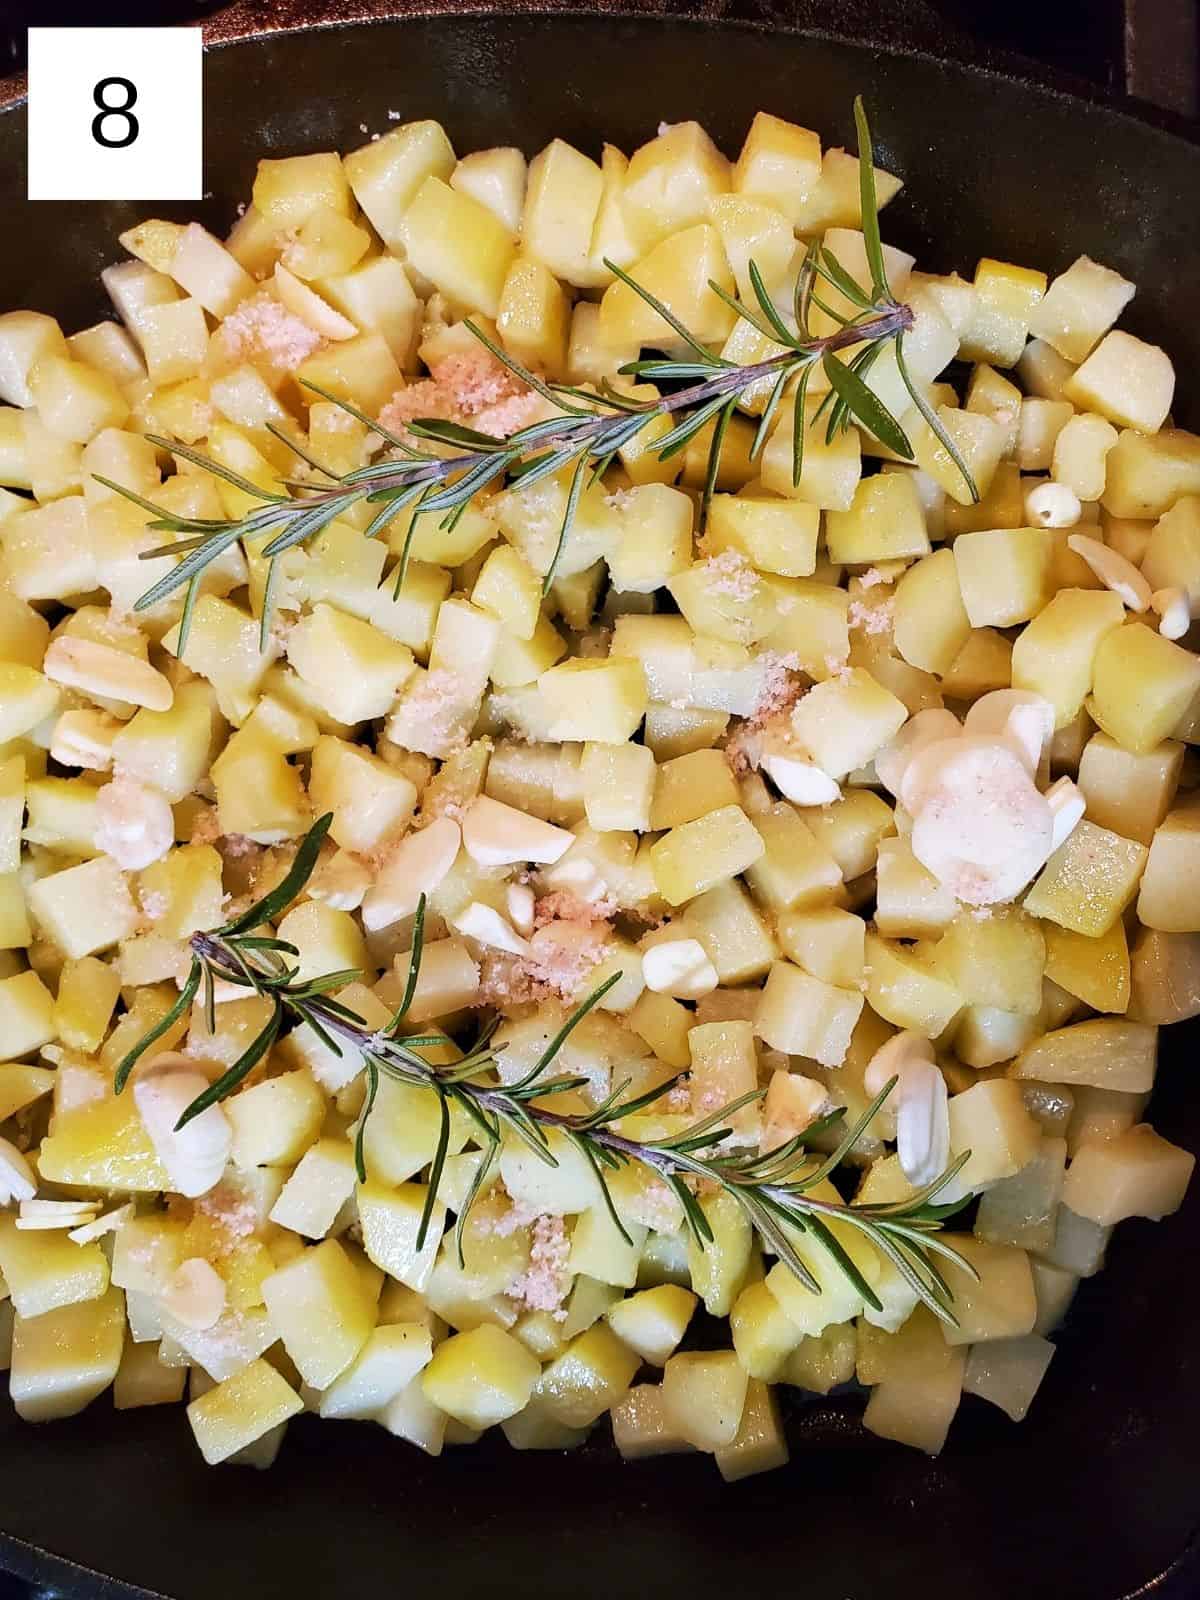 potato cubes, topped with seasonings and rosemary sprigs, in an oil-coated cast iron pan.